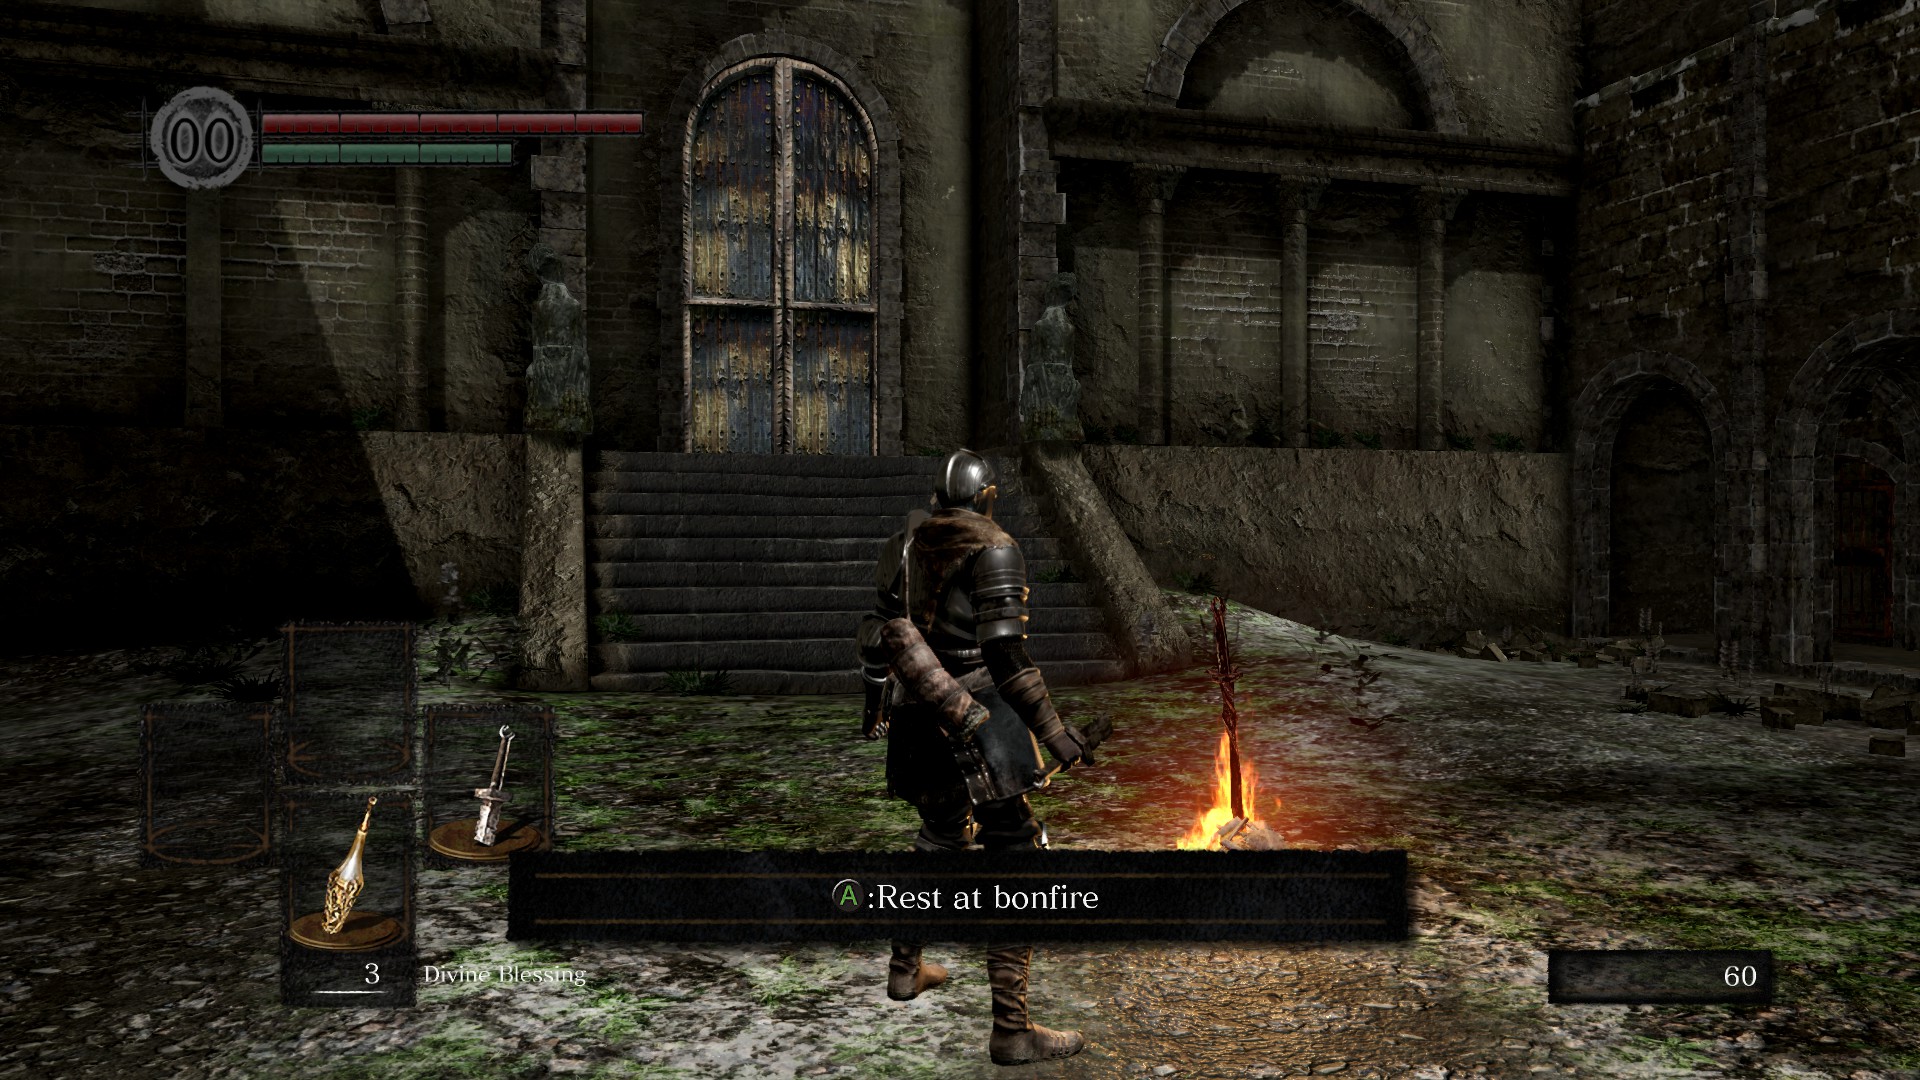 Dark souls rest in peace by the fire